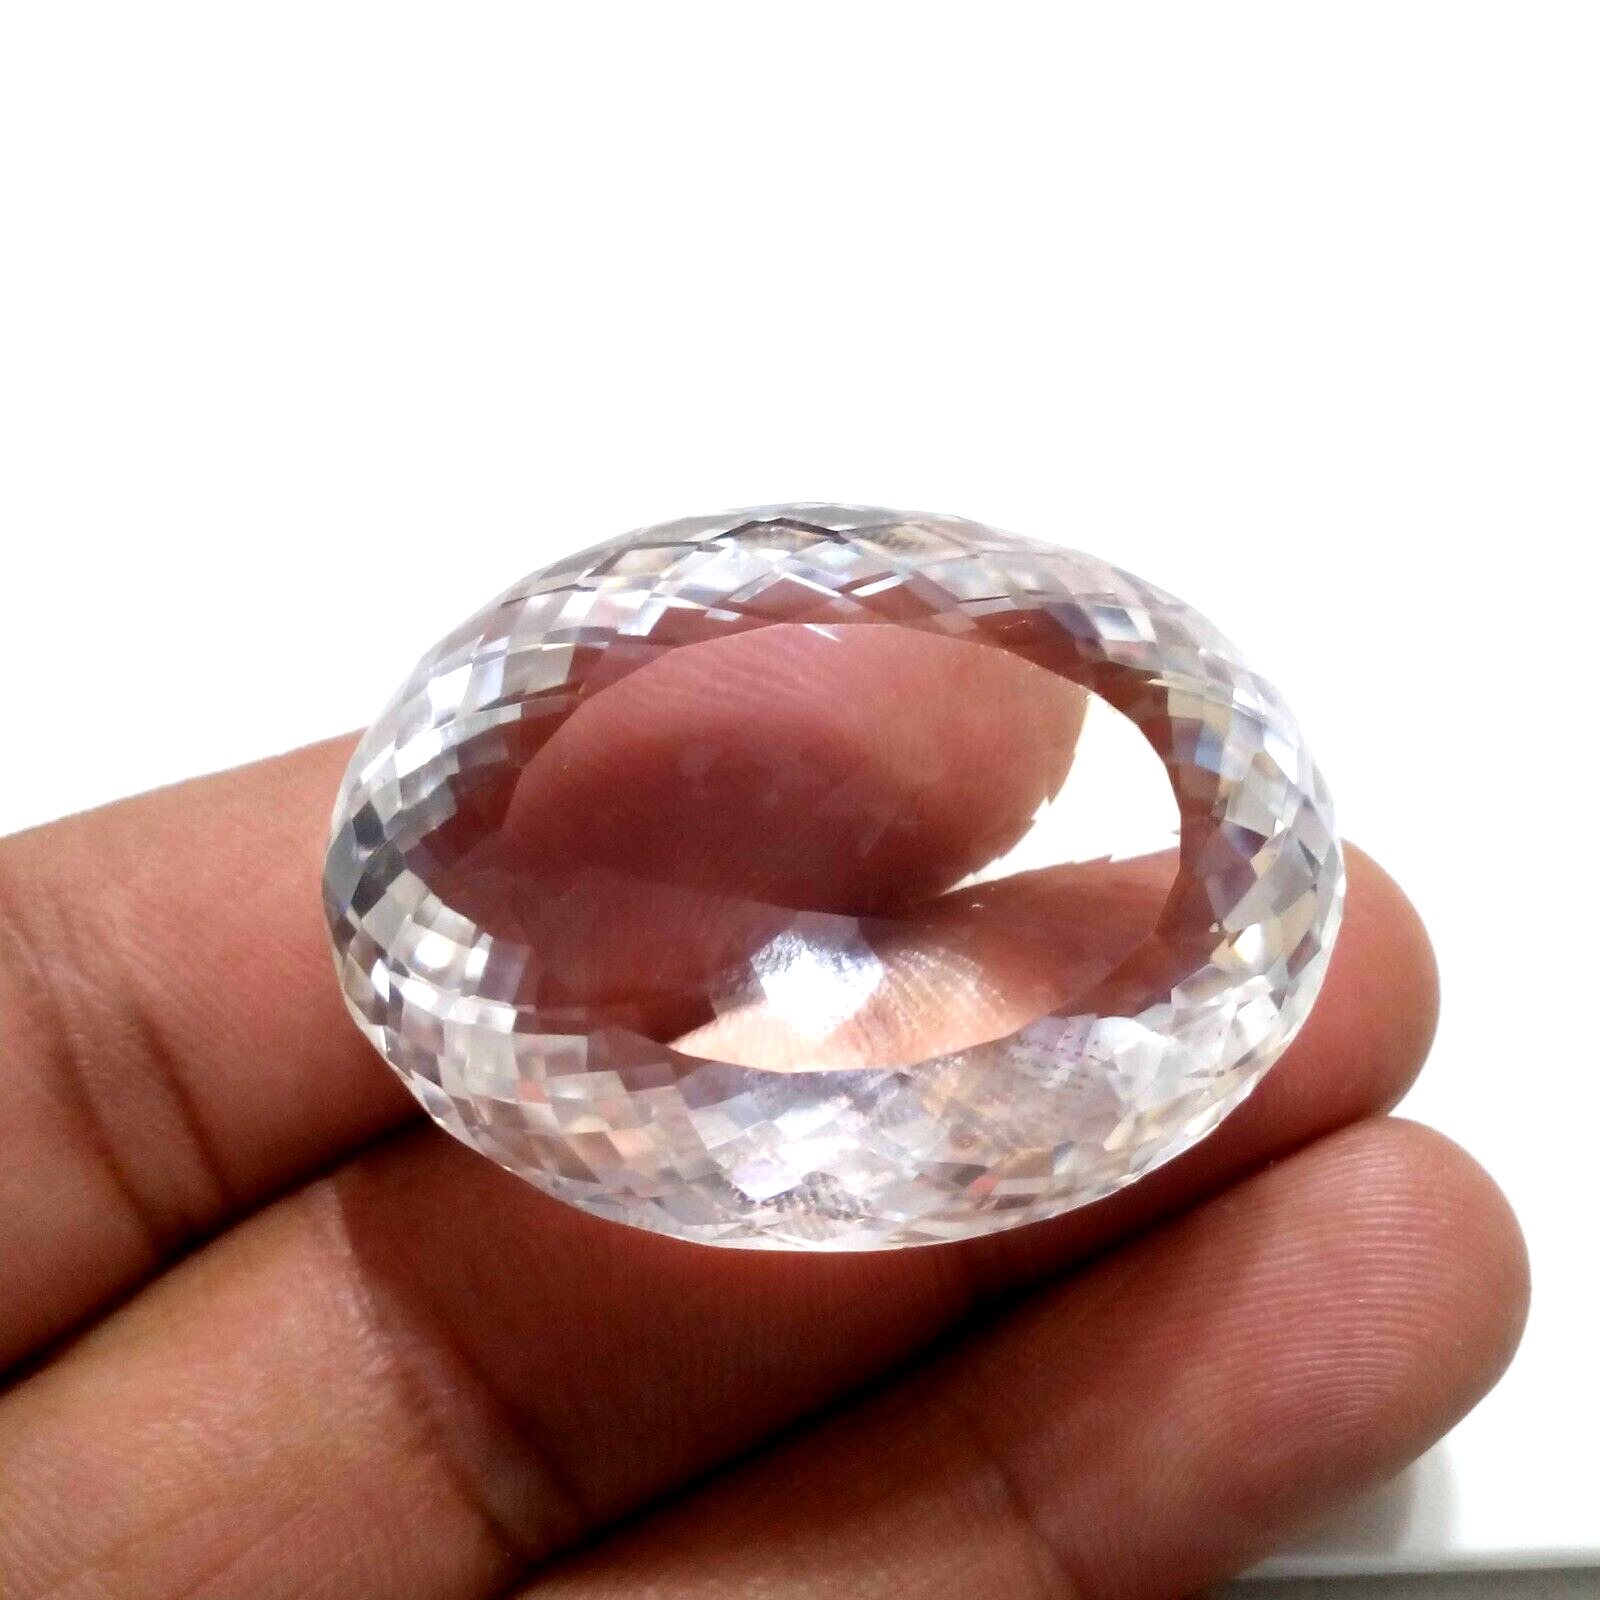 Awesome Huge Size Clear Quartz Faceted Oval Shape 175 Carat Loose Gemstone